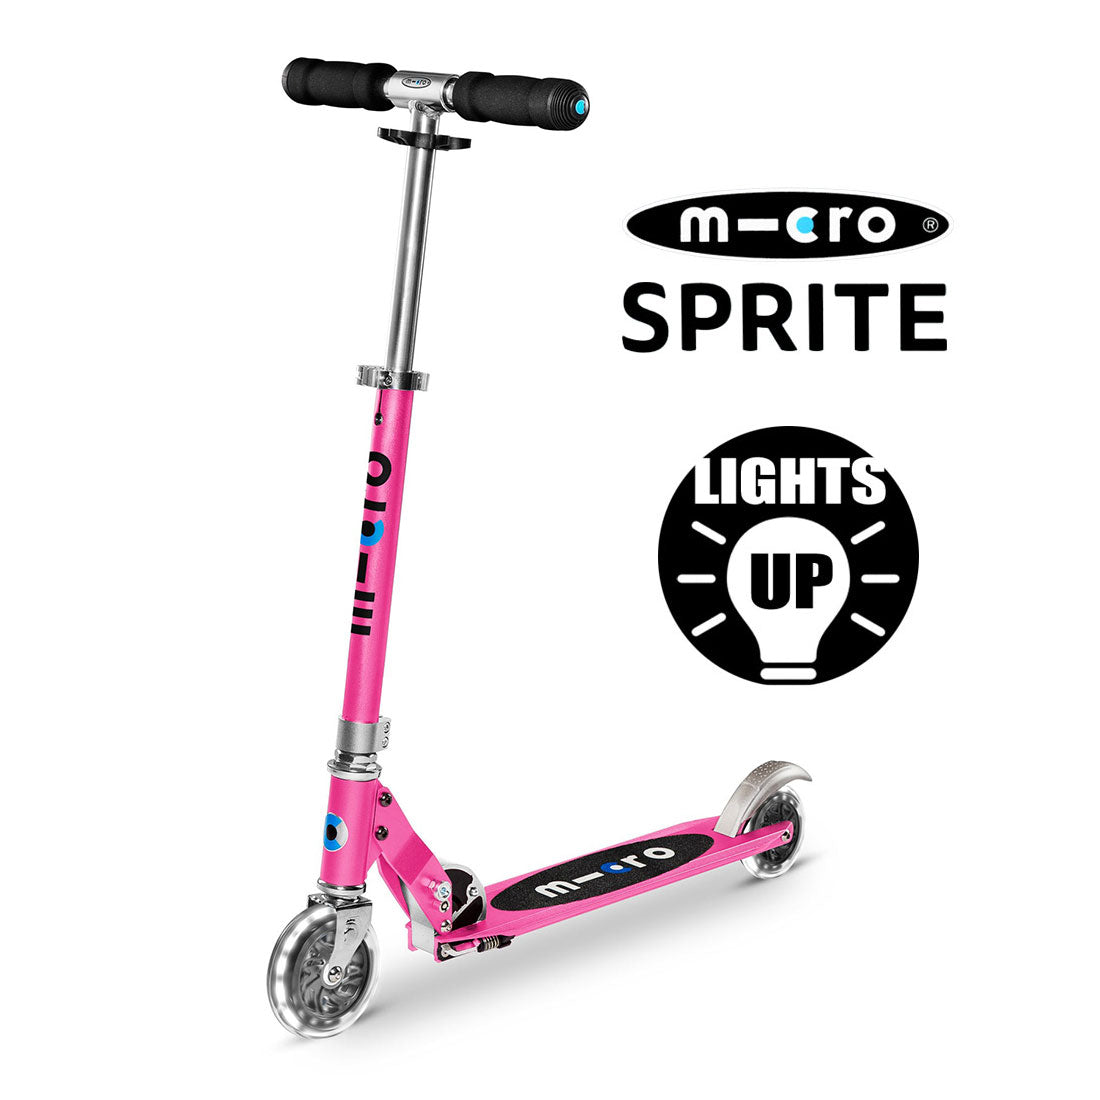 Micro Sprite LED Scooter - Pink Scooter Completes Rec